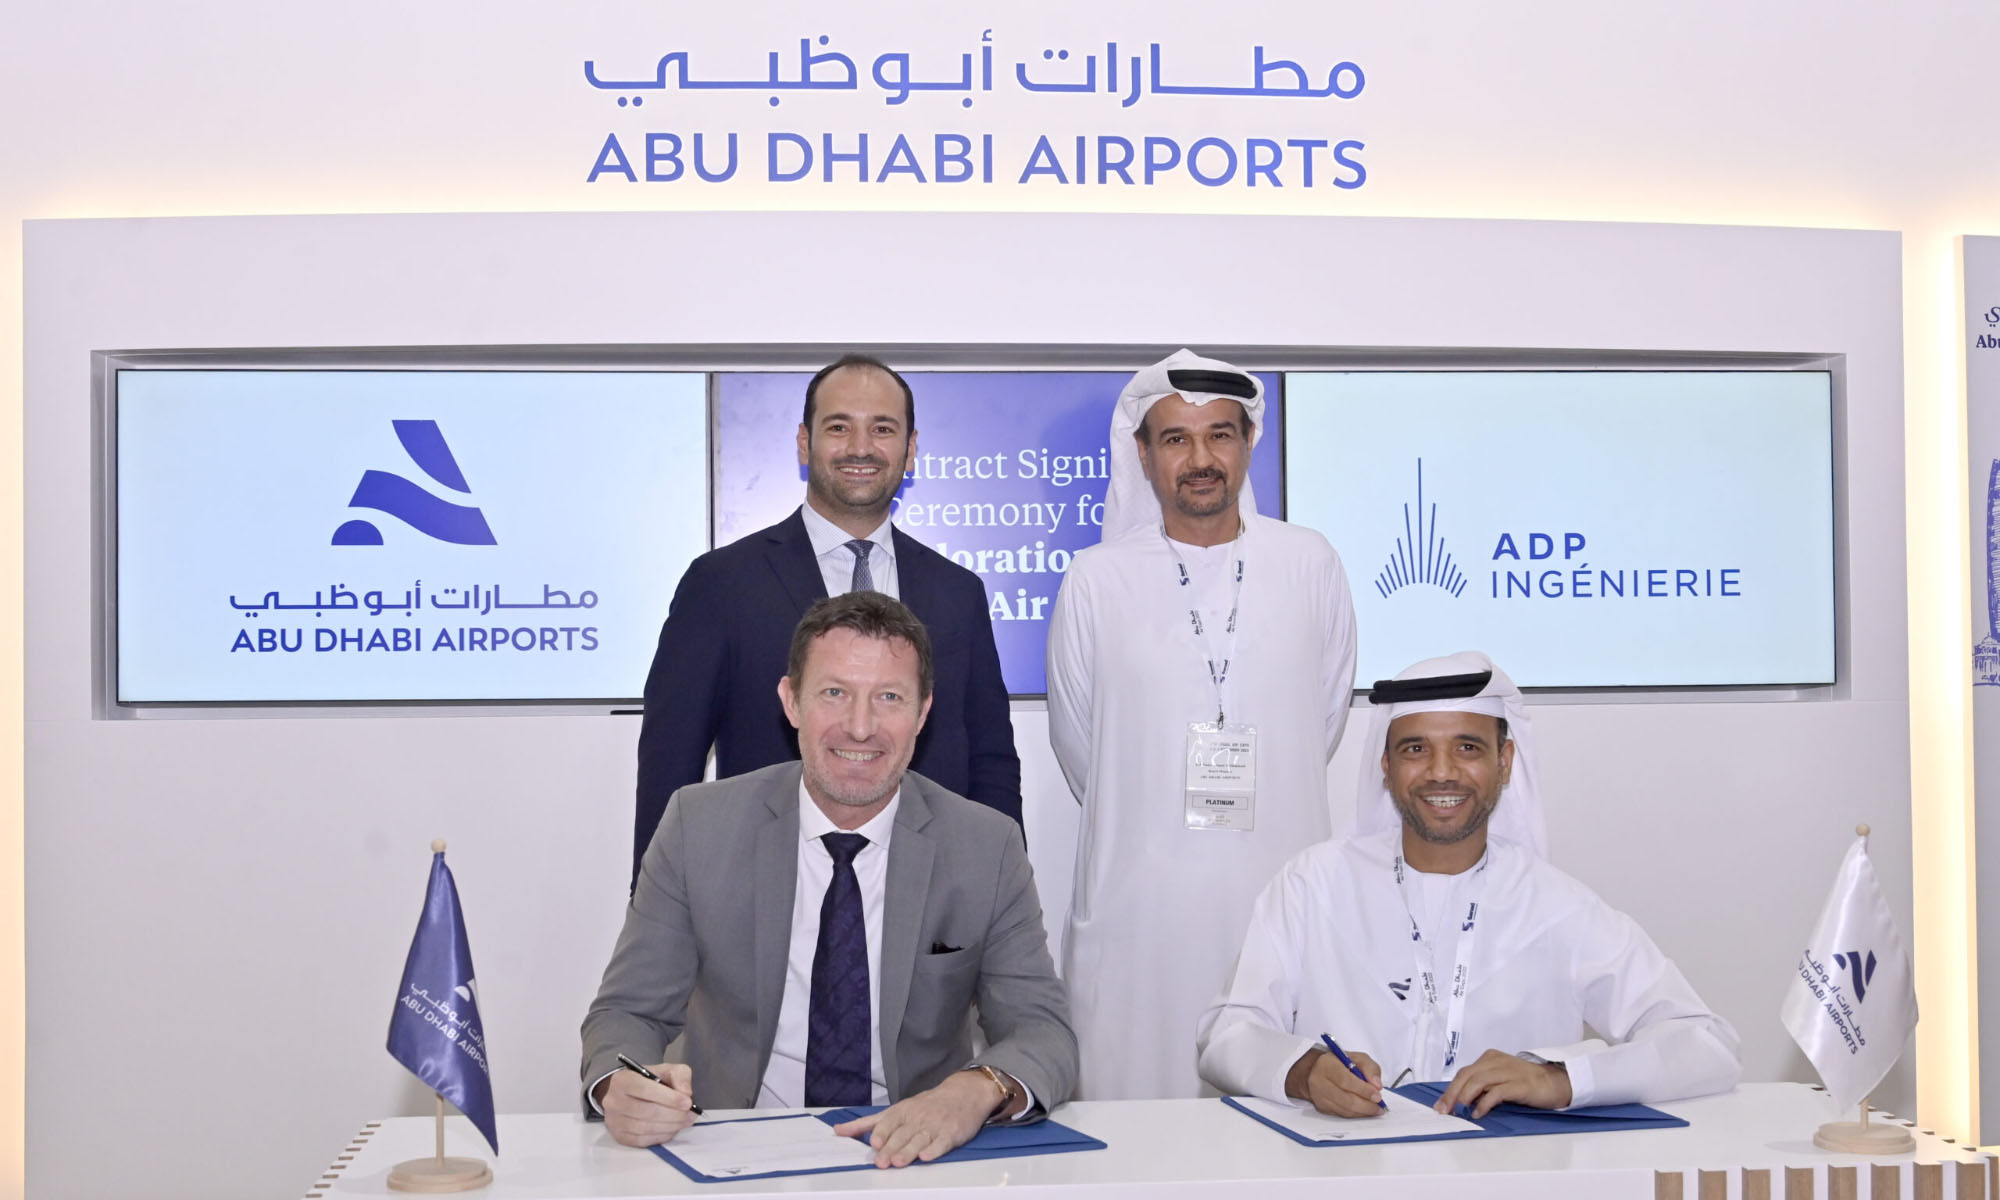 abu dhabi airports signs deal wit groupe adp